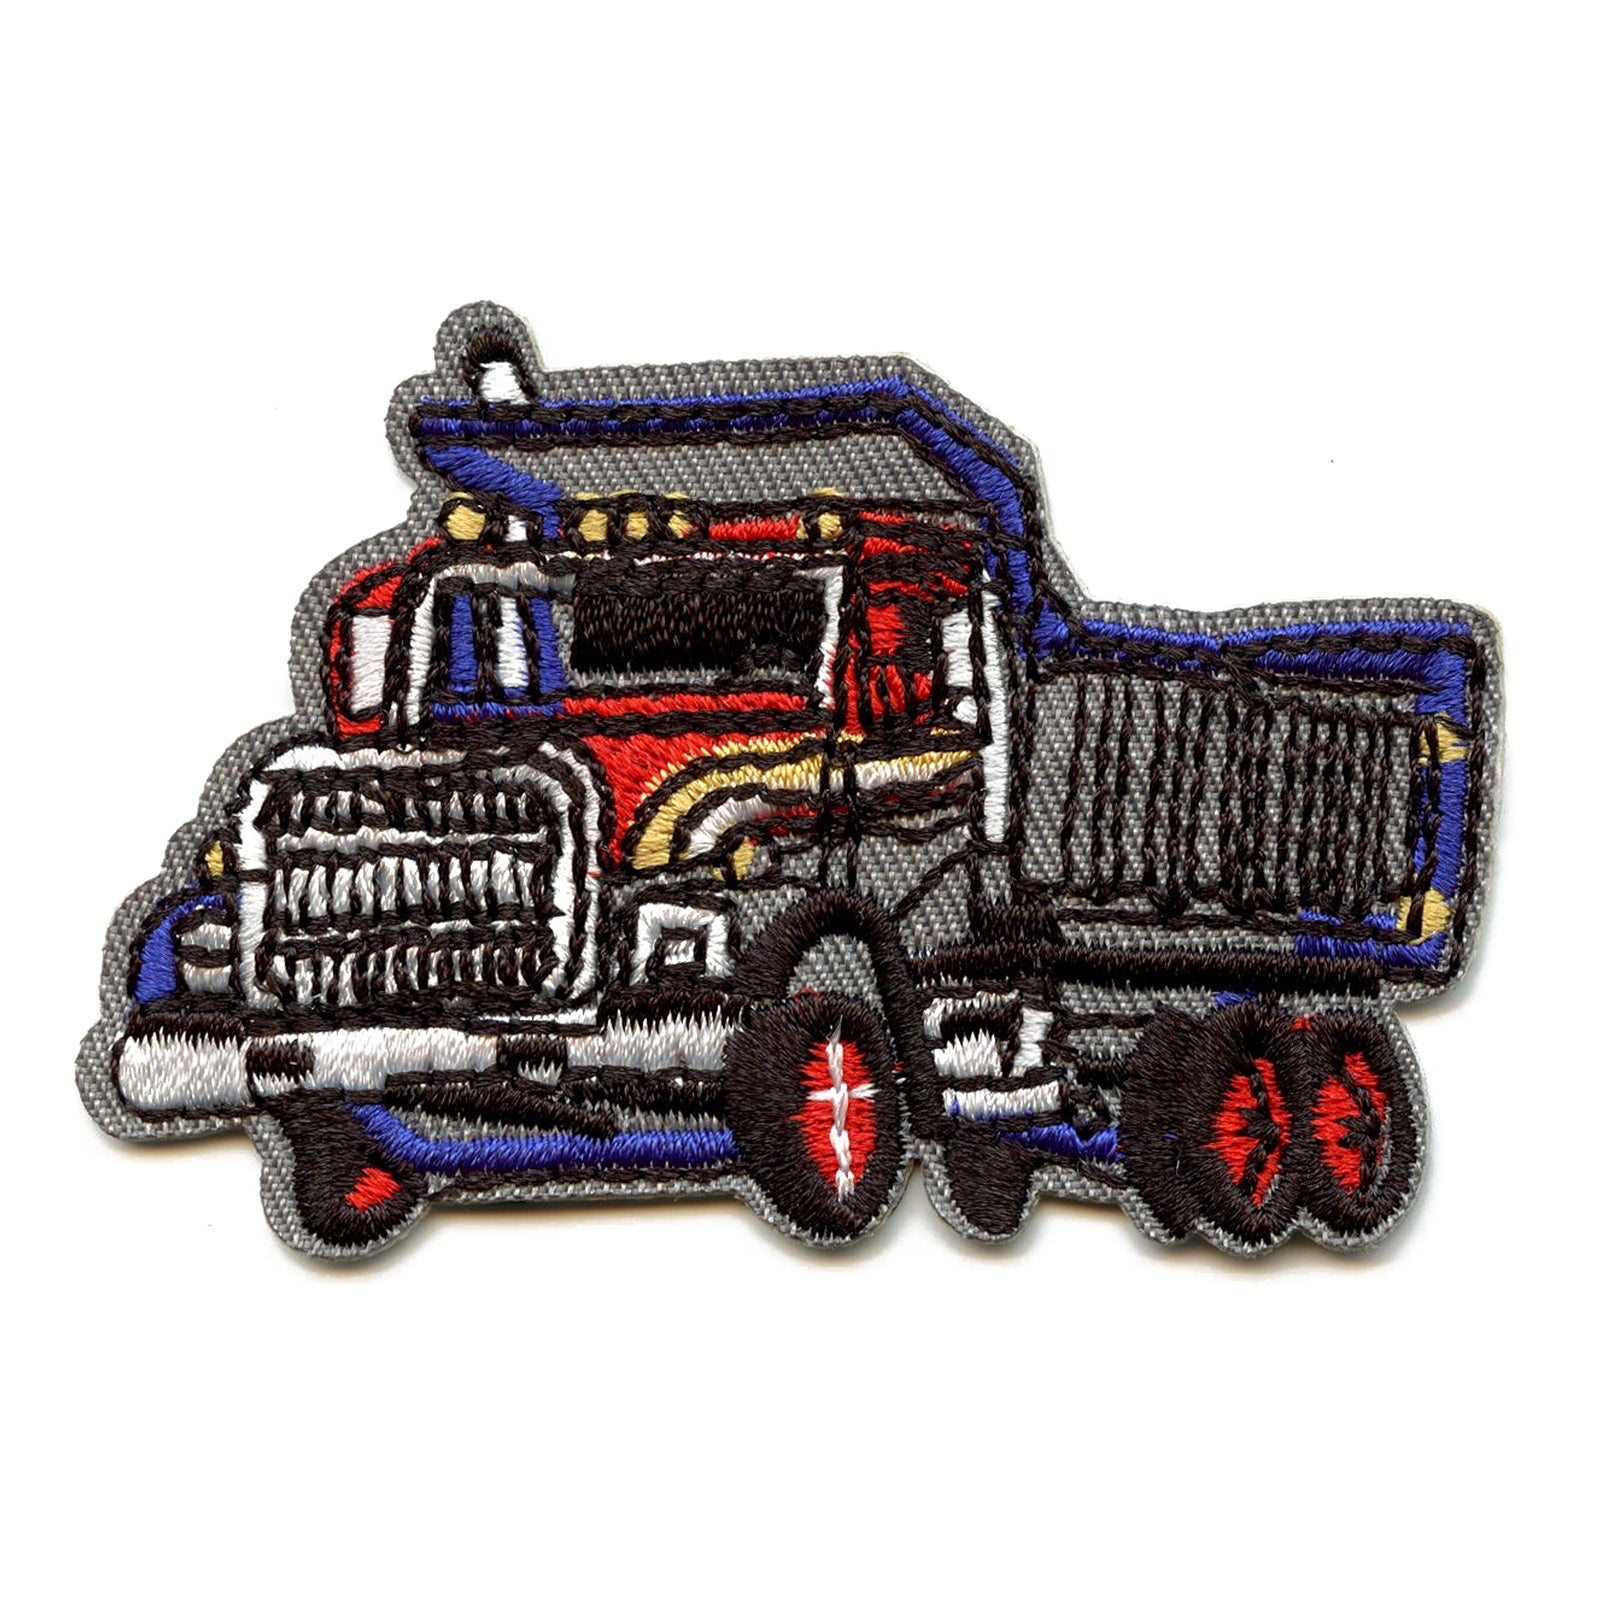 Grey Concrete Construction Dump Truck Emoji Embroidered Iron On Patch 